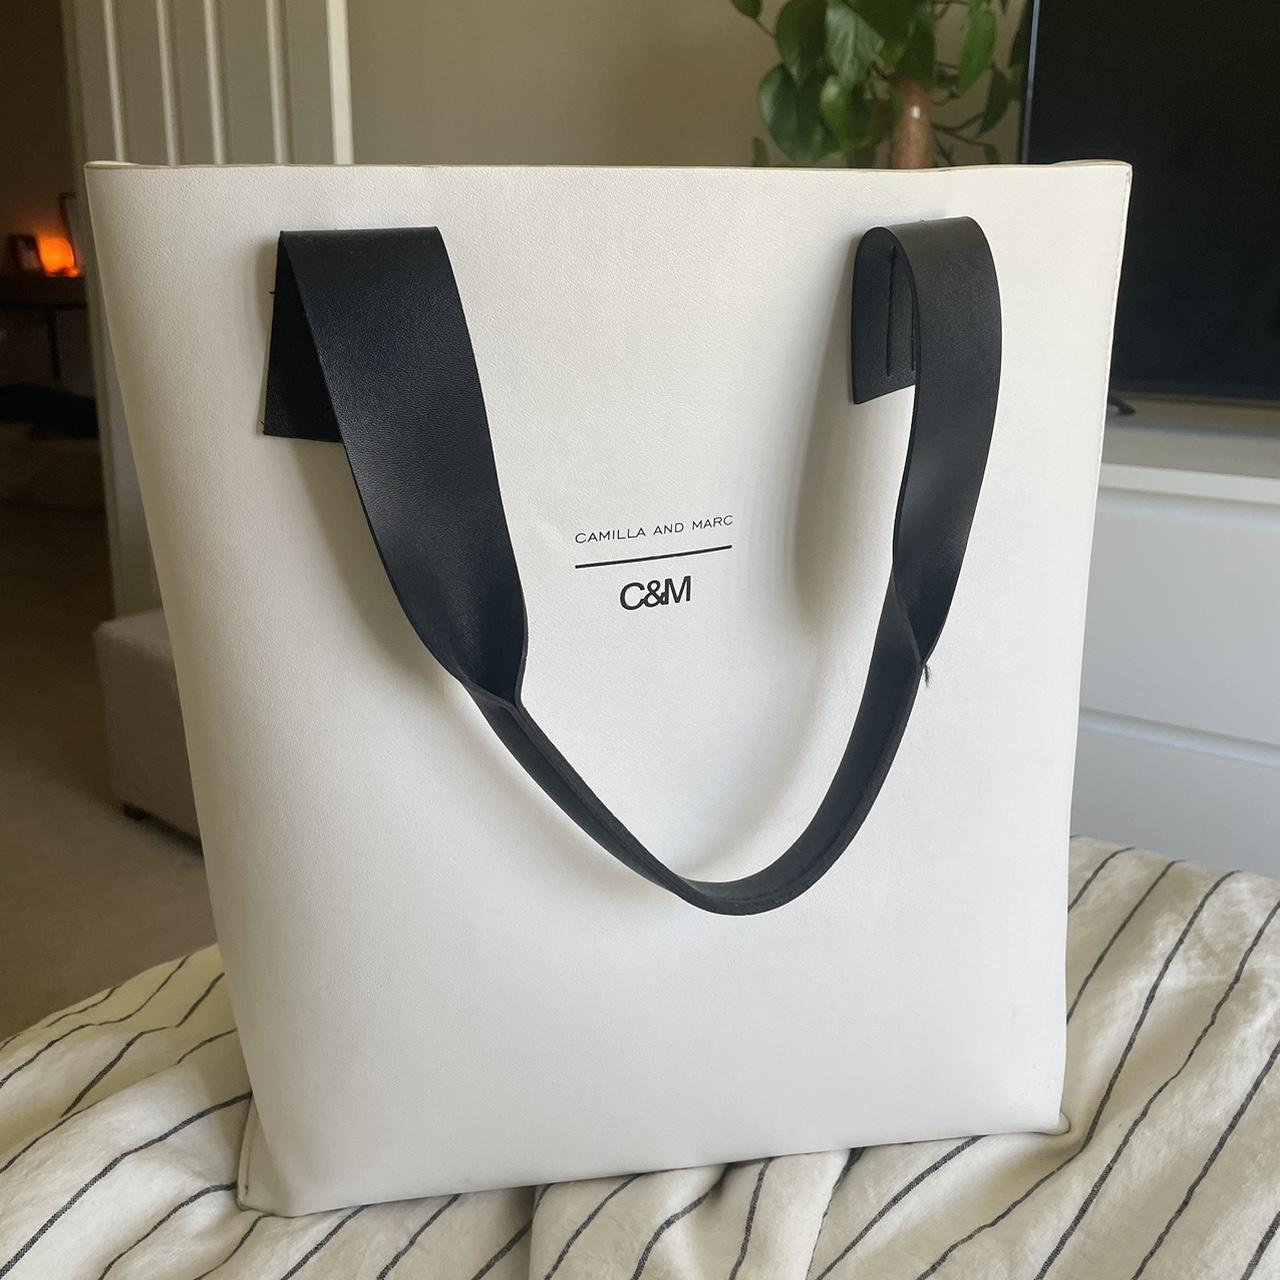 Camilla and Marc Women's White Bag | Depop